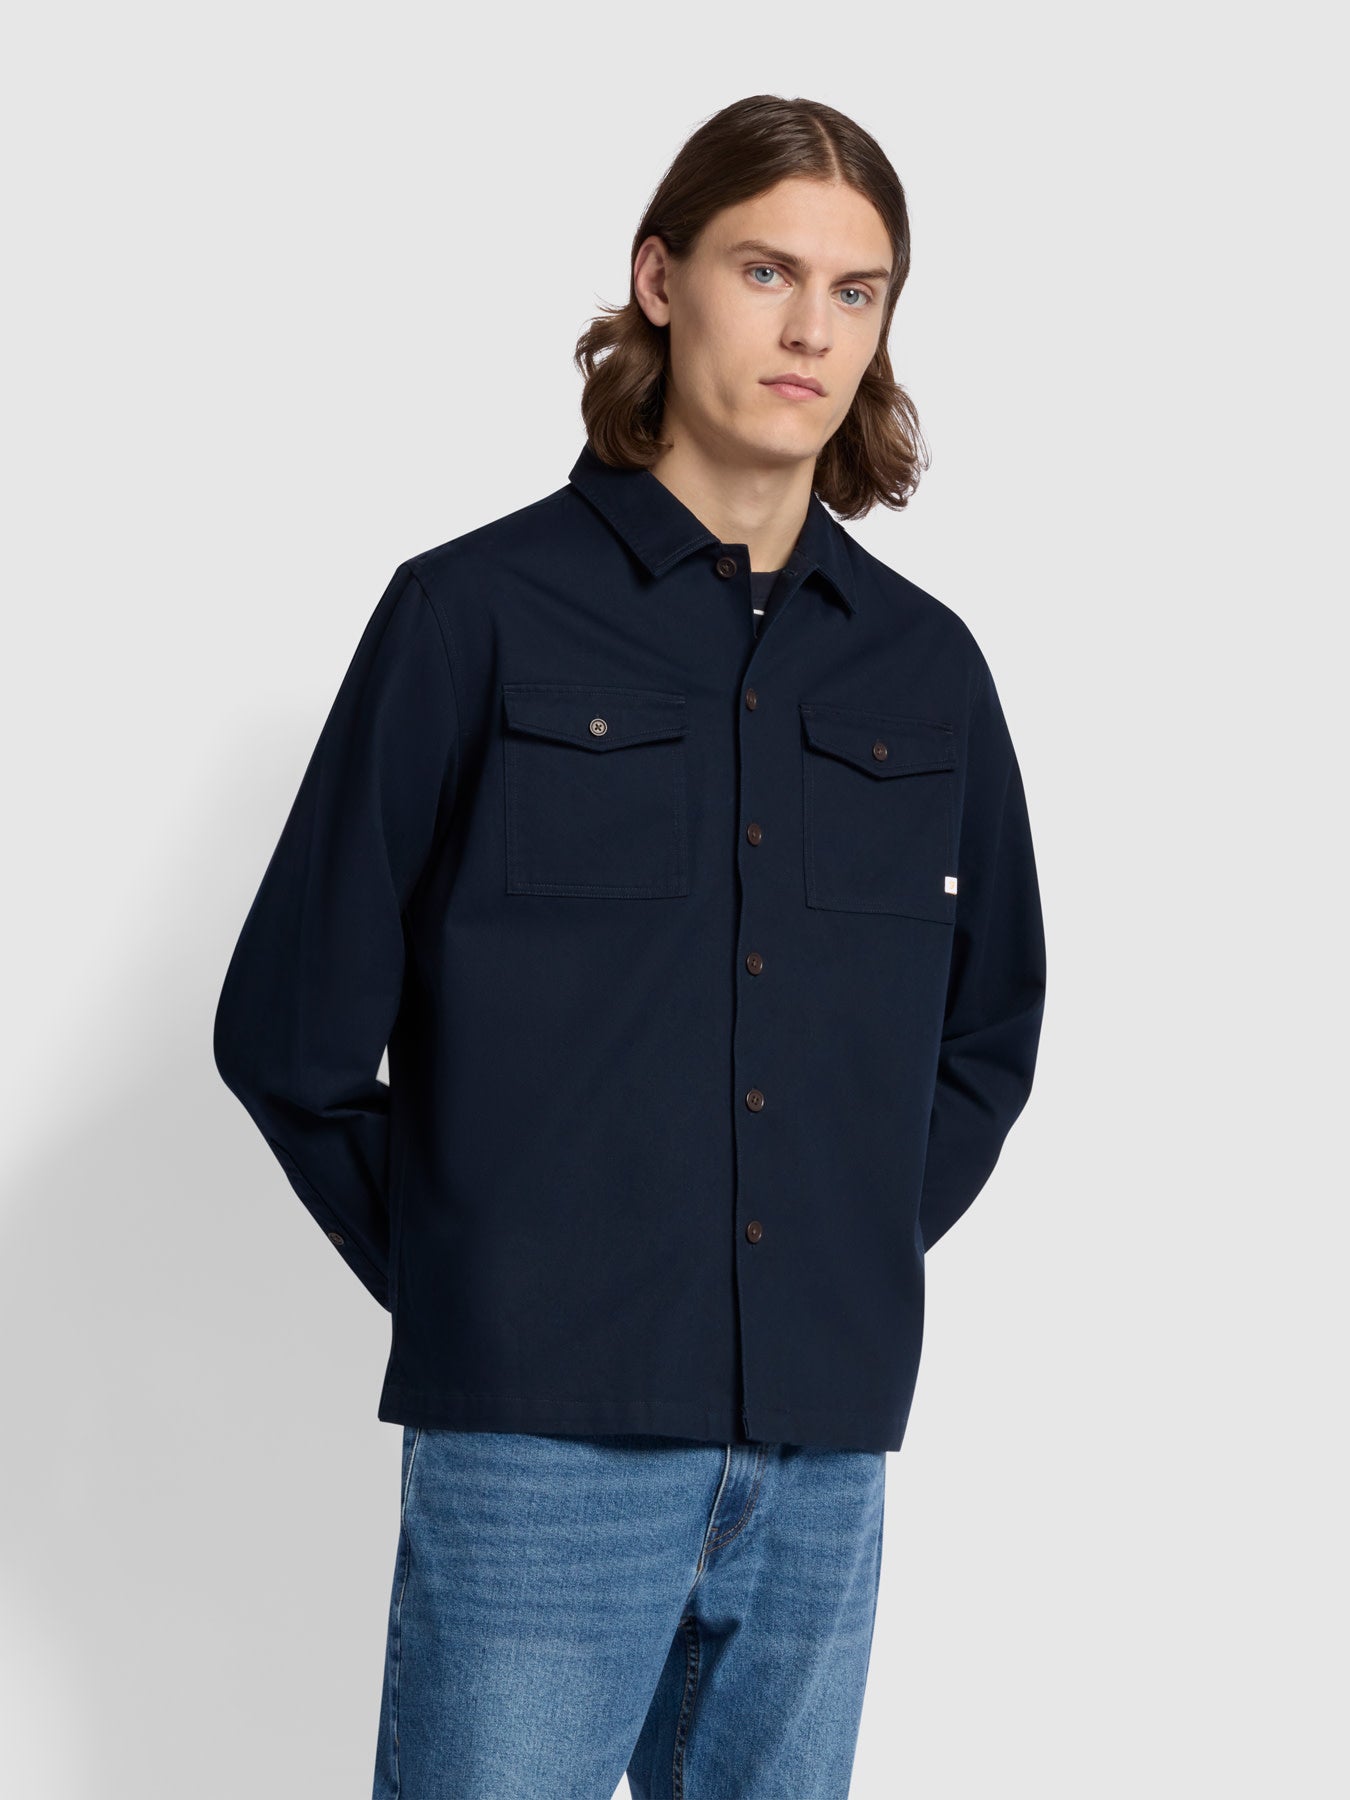 View Peter Casual Fit Long Sleeve Overshirt In True Navy information